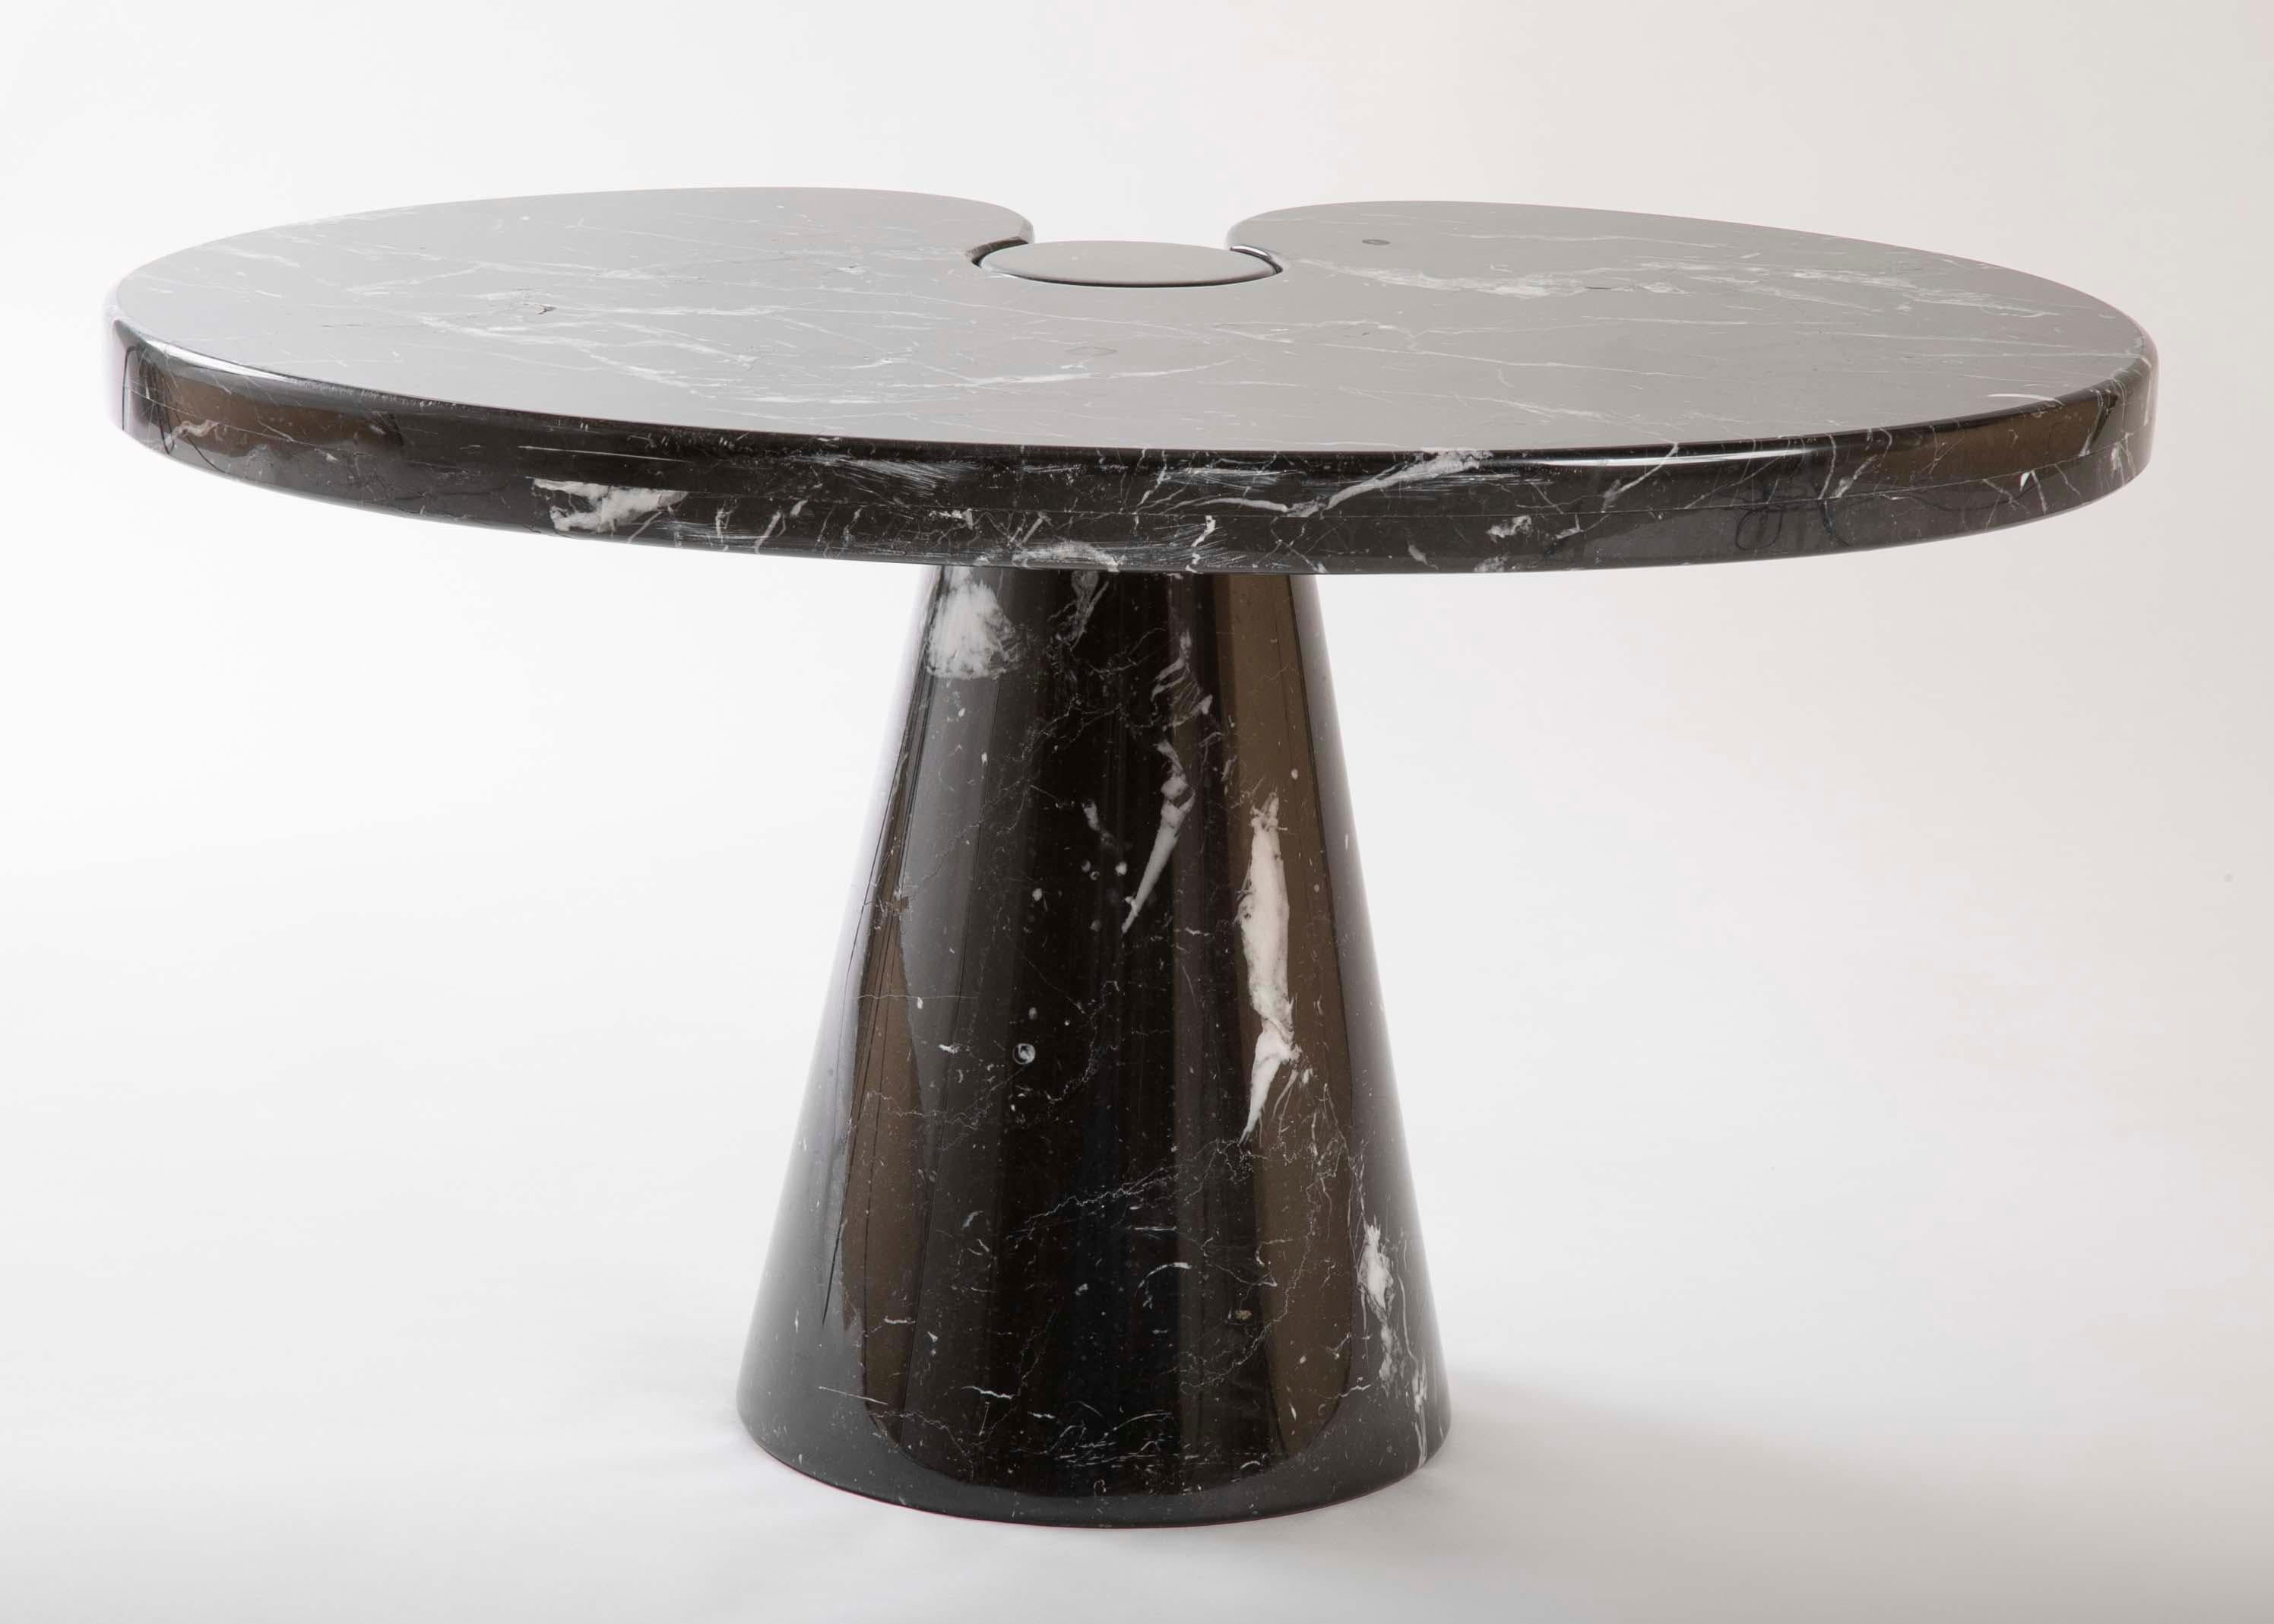 Organic Modern Organic Form Nero Marquina Marble Side Table Designed by Angelo Mangiarotti